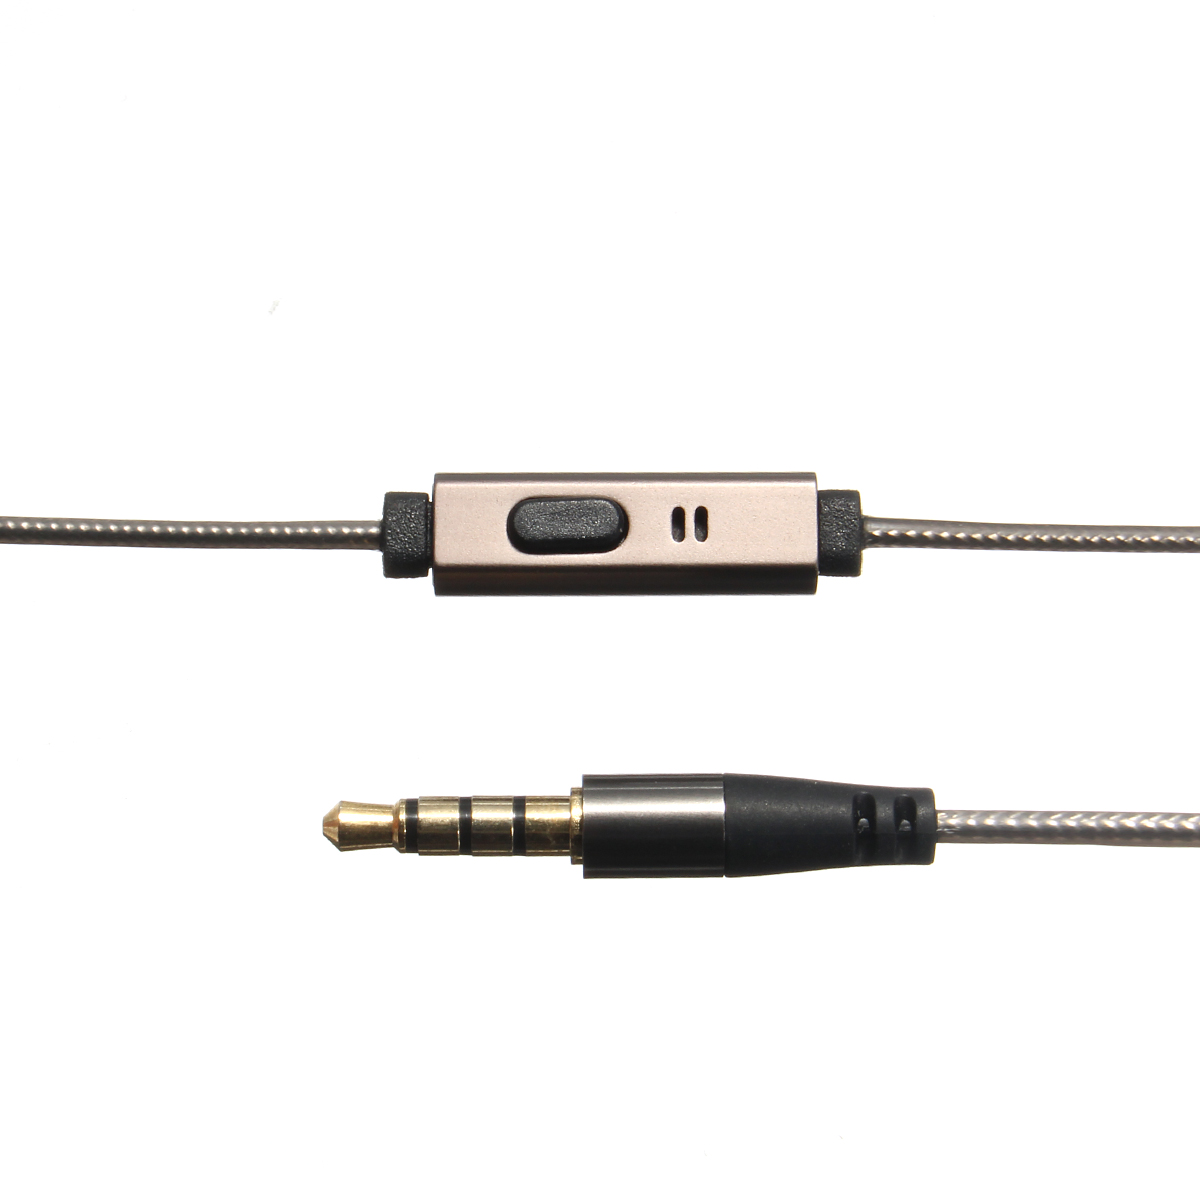 128M-Replacement-Audio-Cord-Cable-with-Mic-for-Shure-SE215-315-535-846-UE900-Headphone-1154717-2